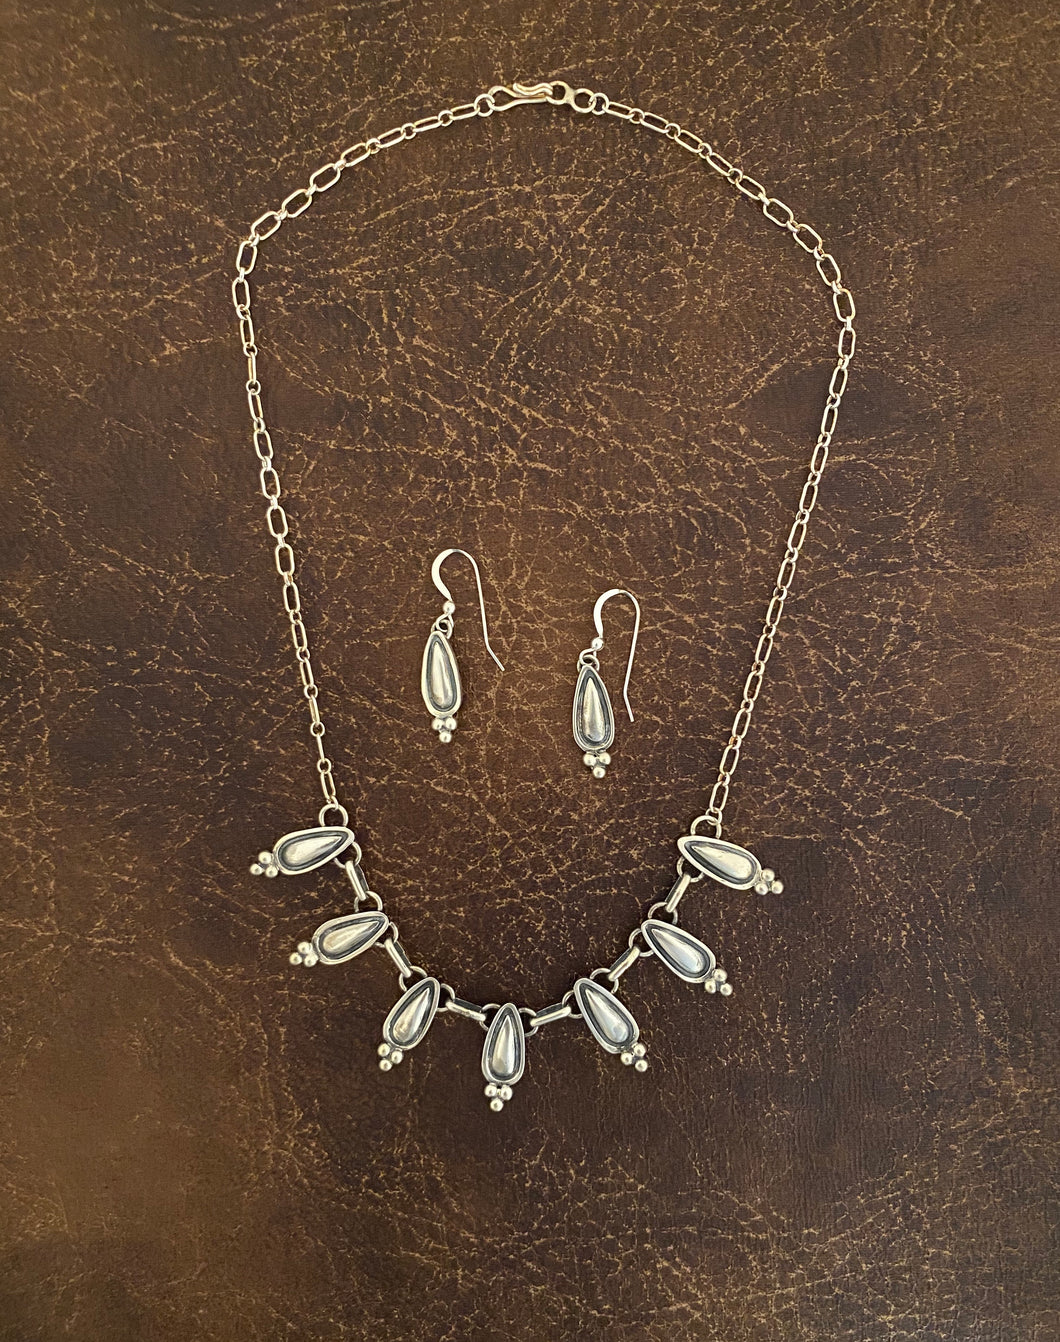 Necklace - All silver necklace with earrings set